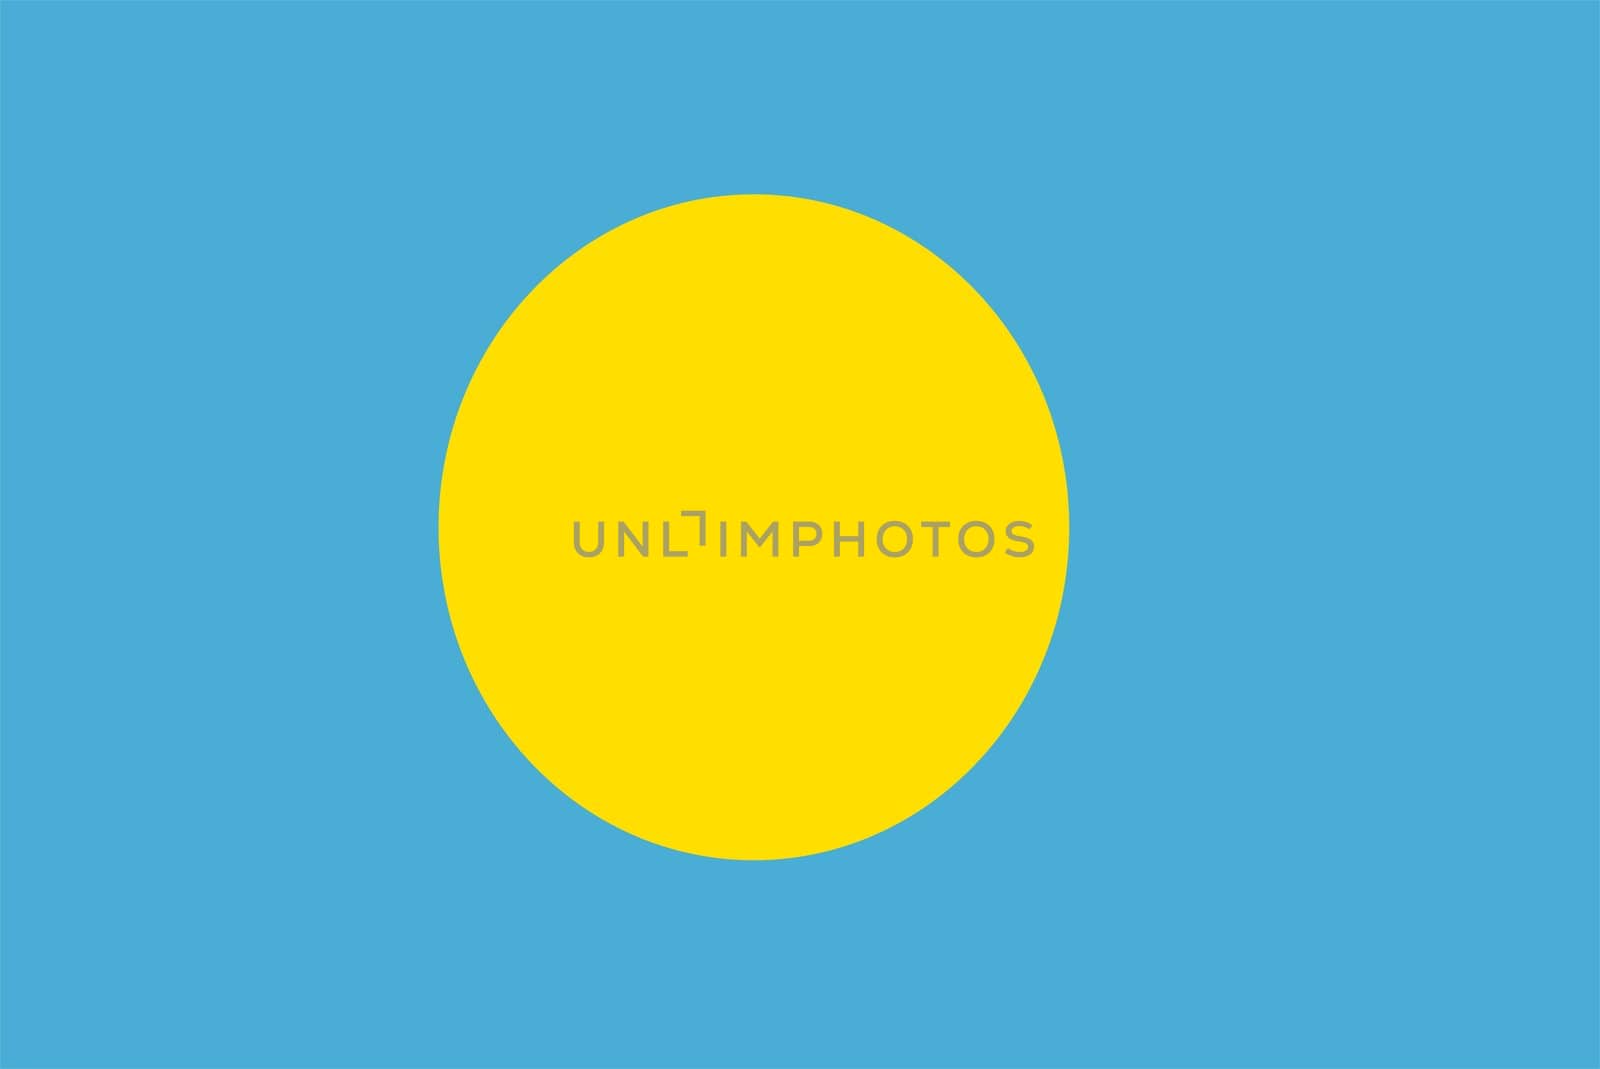 2D illustration of the flag of Palau vector